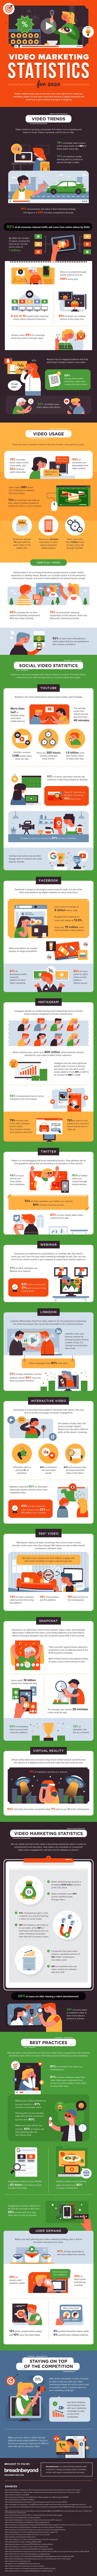 Video Marketing Statistics that's Going to Rock 2020 [INFOGRAPHIC]